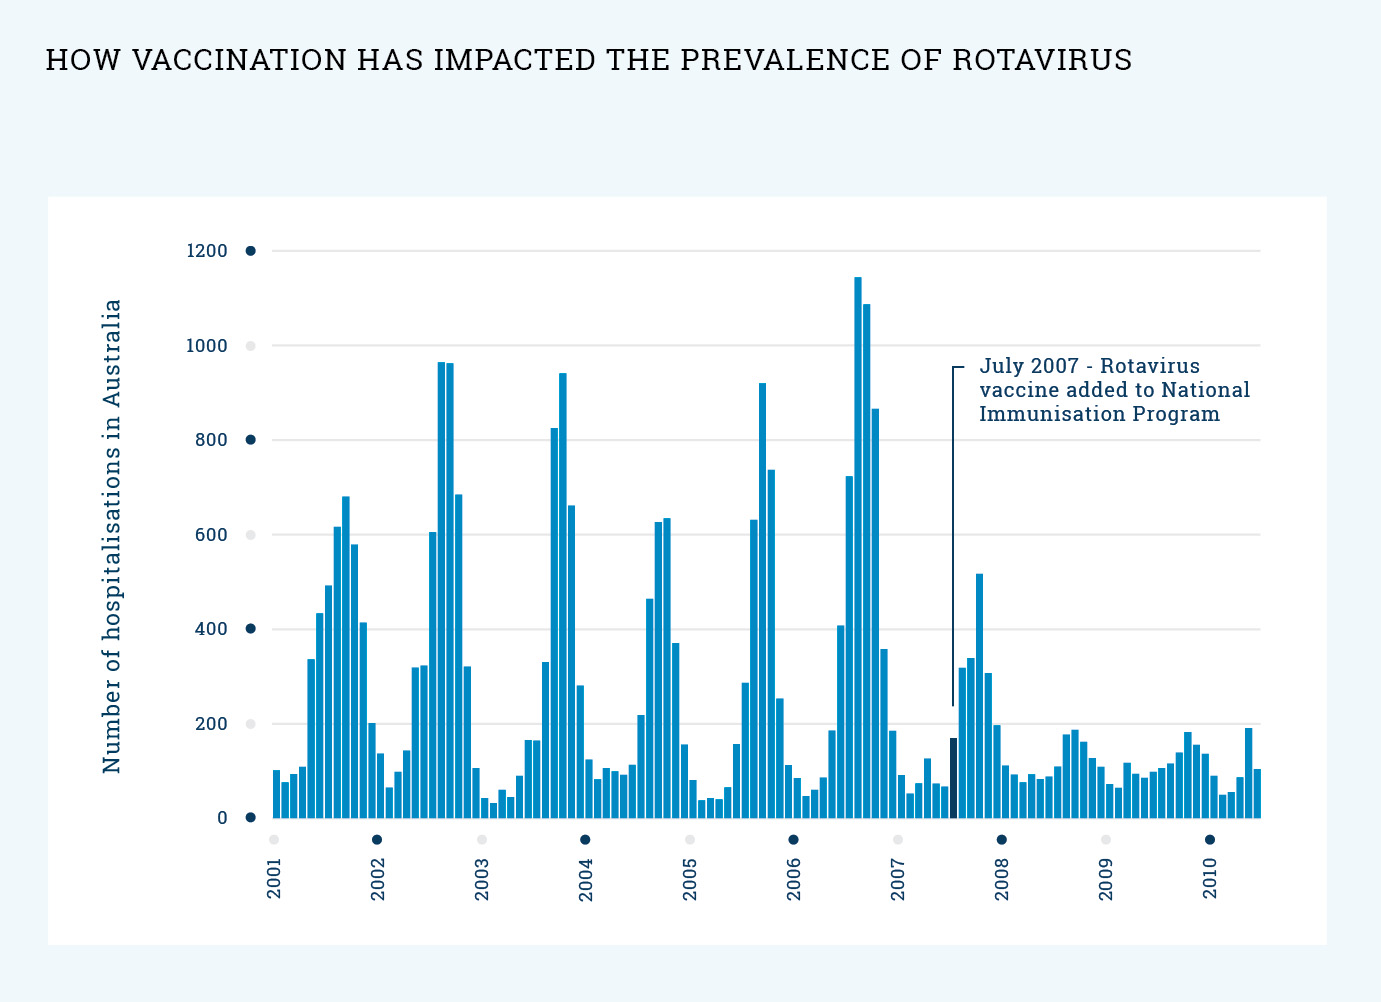 graph: What impact has vaccination had on the prevalence of rotavirus?